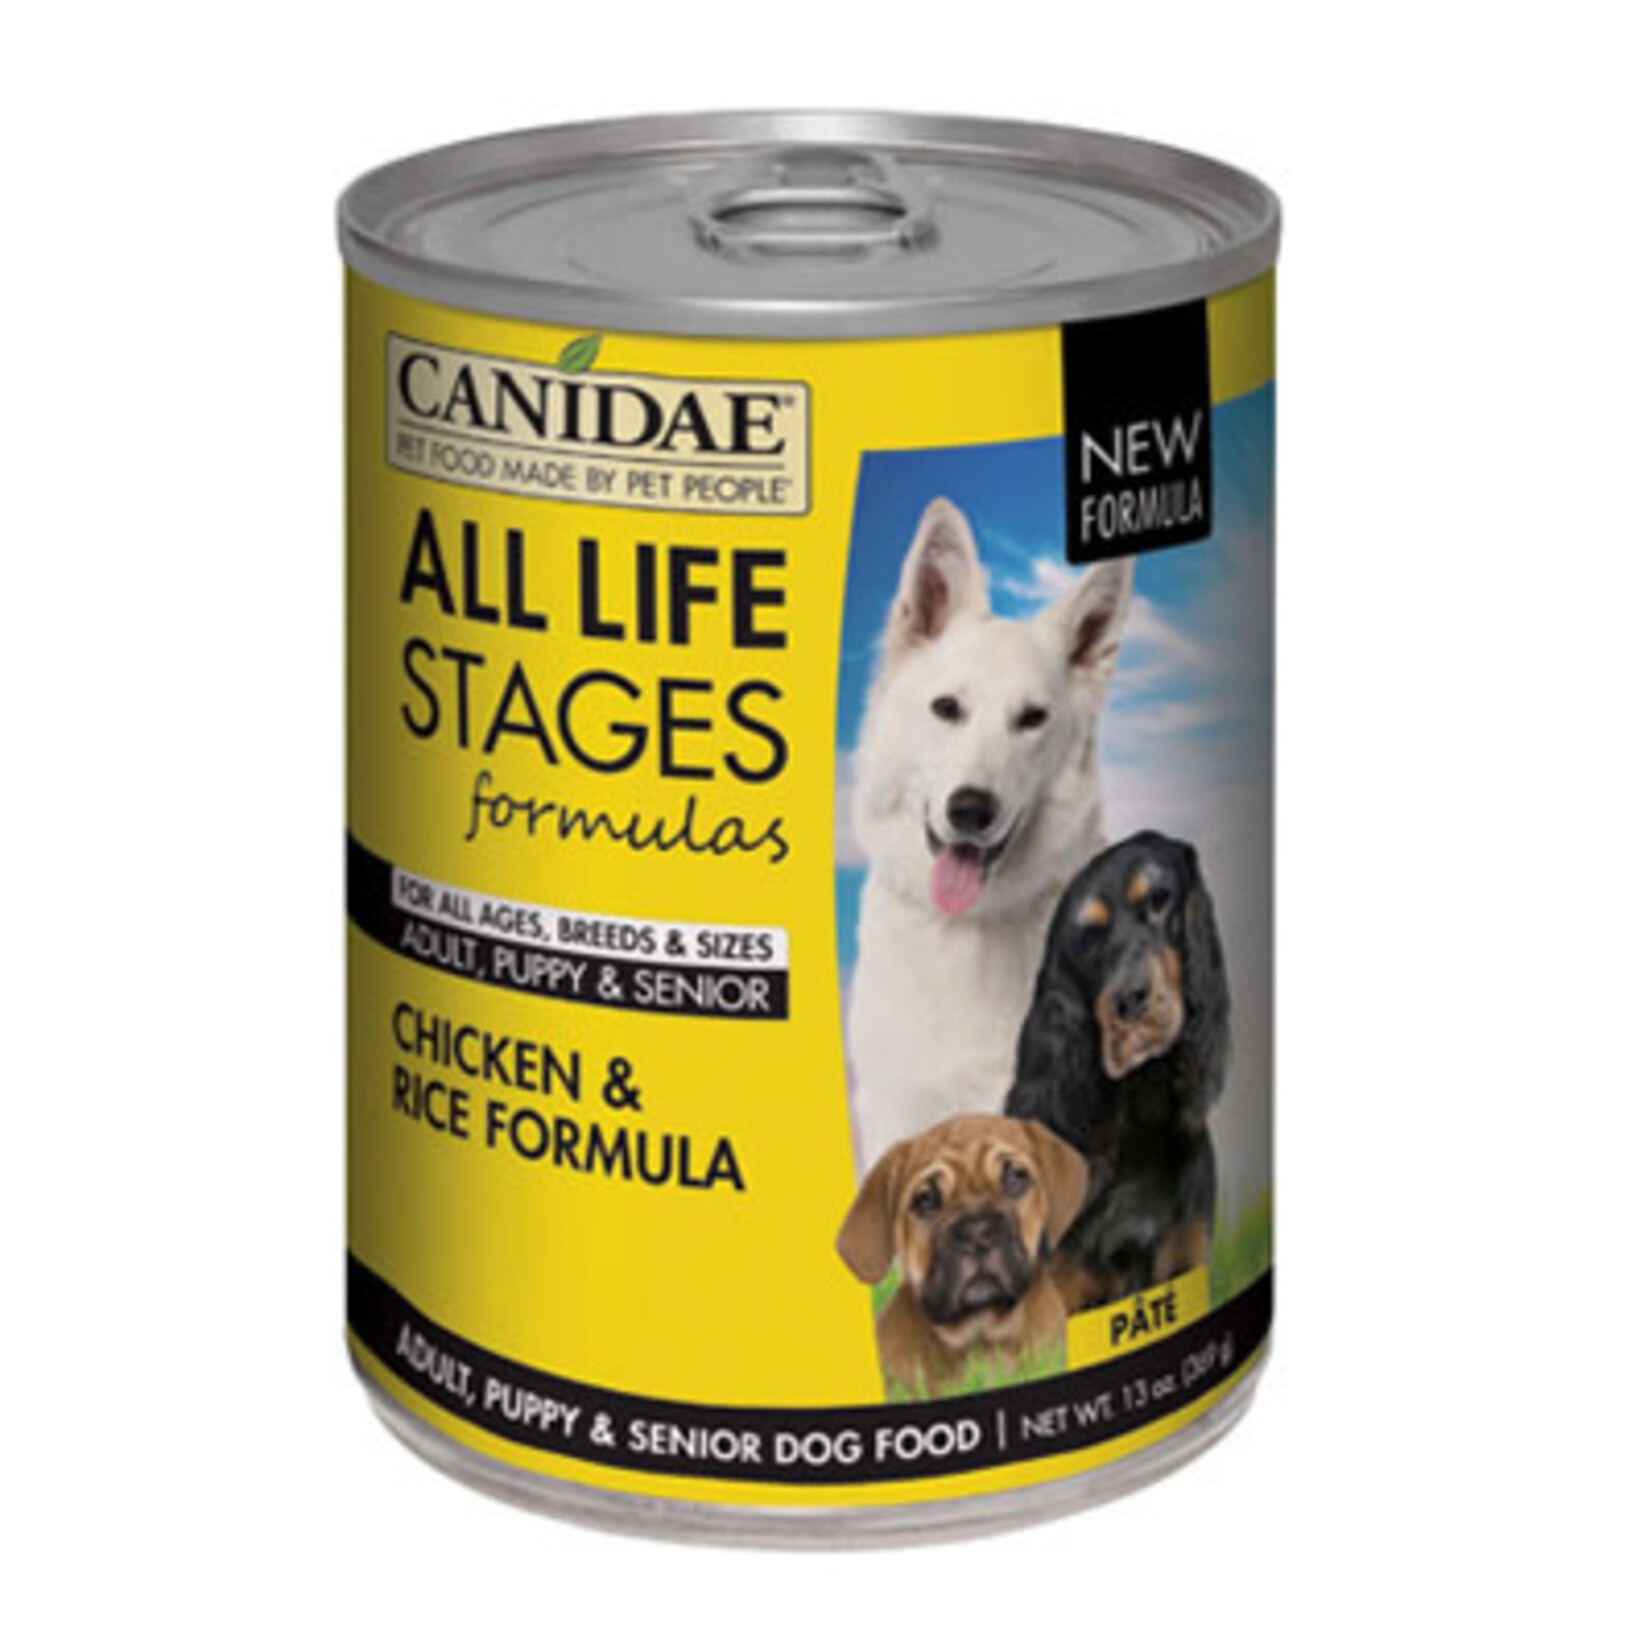 Canidae Canidae All Life Stages 13oz Canned Dog Food